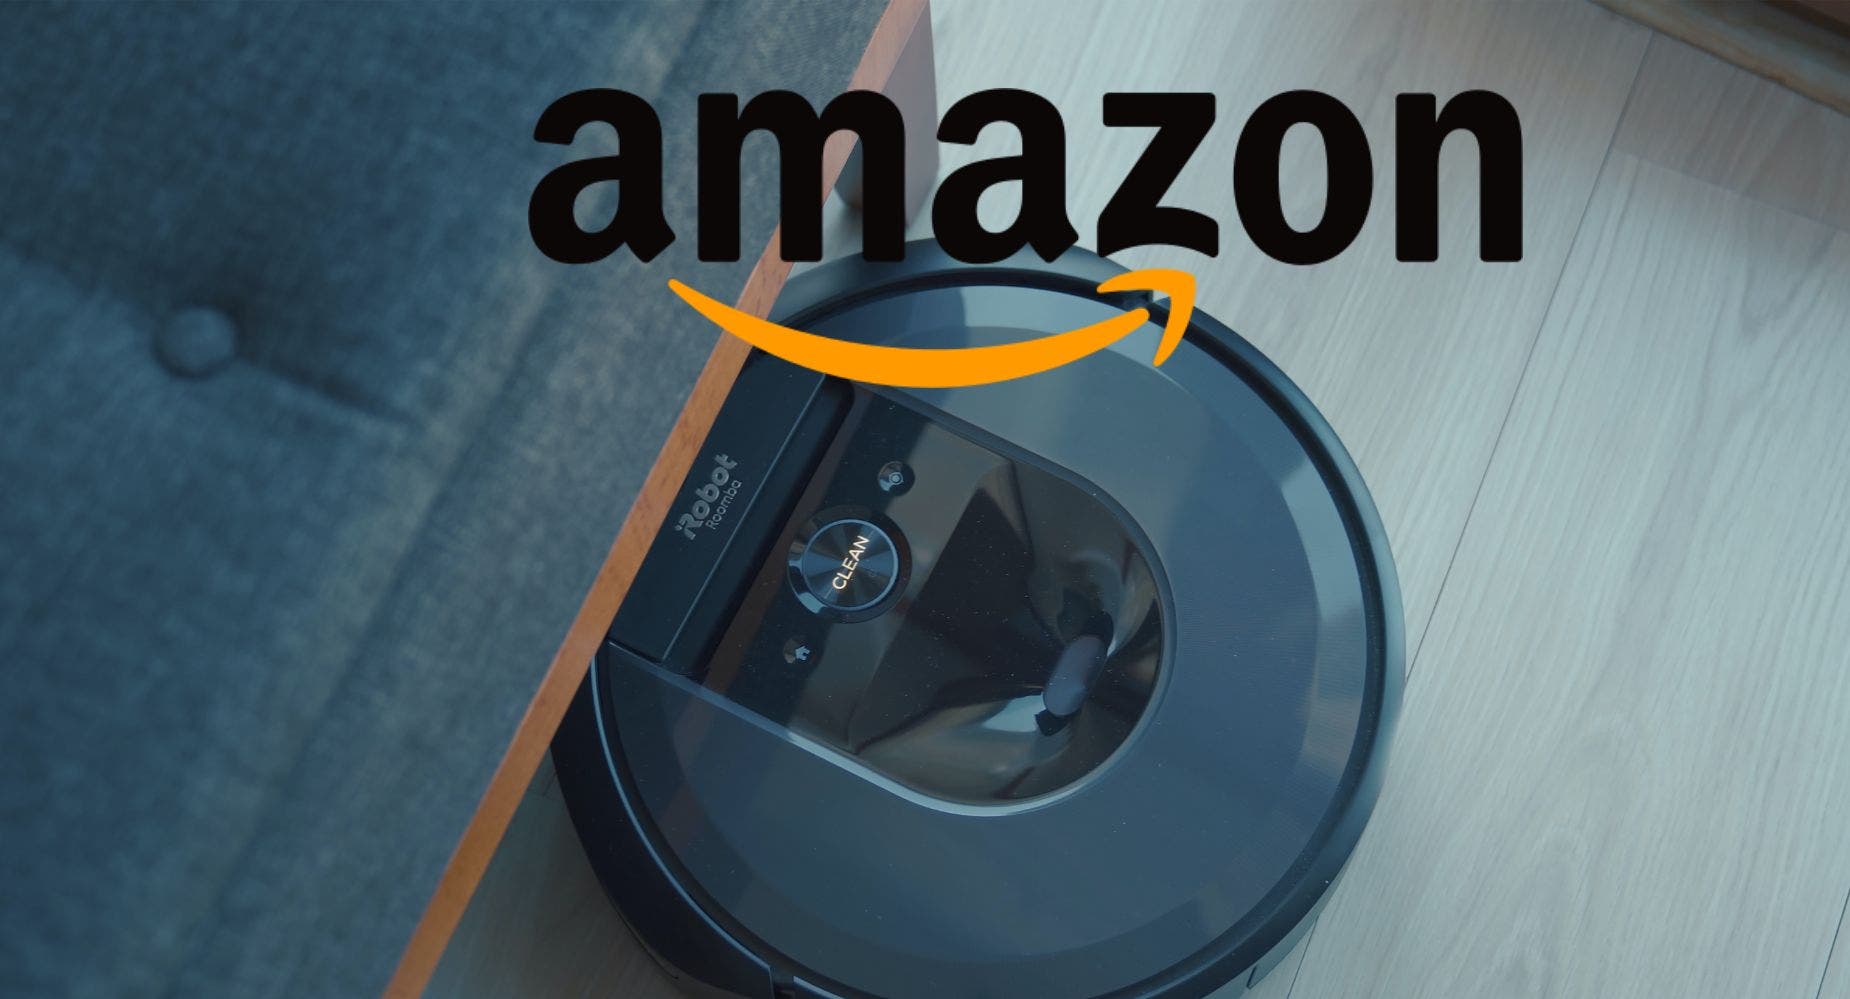 Amazon's iRobot Deal Is Now Facing Tough Antitrust Review By Federal Trade Commission